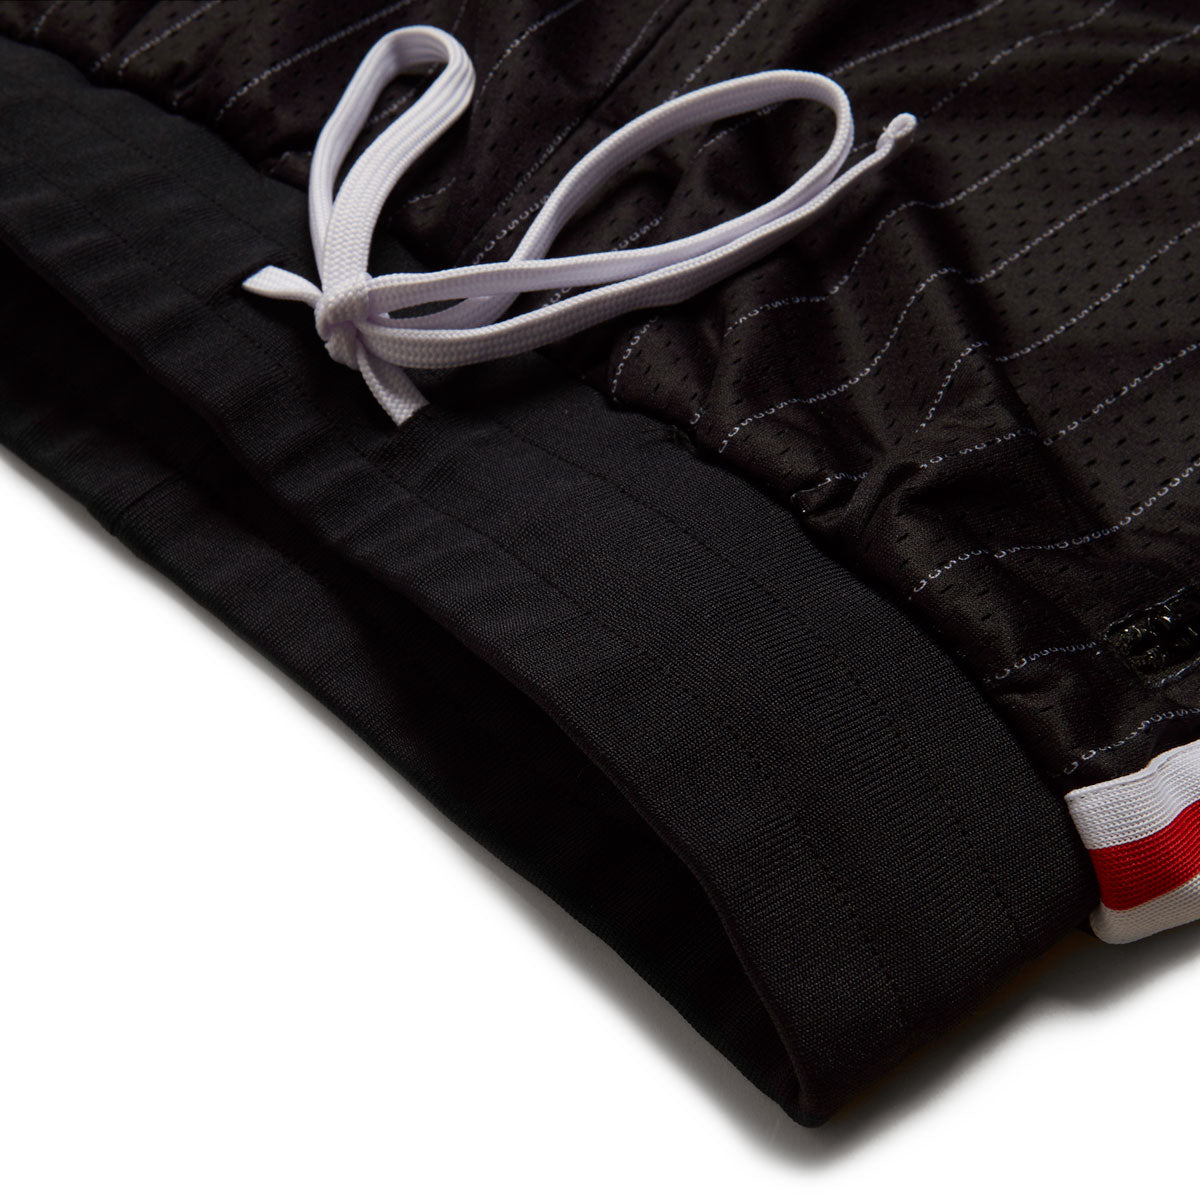 CCS Crossover Basketball Shorts - Black/Red image 5